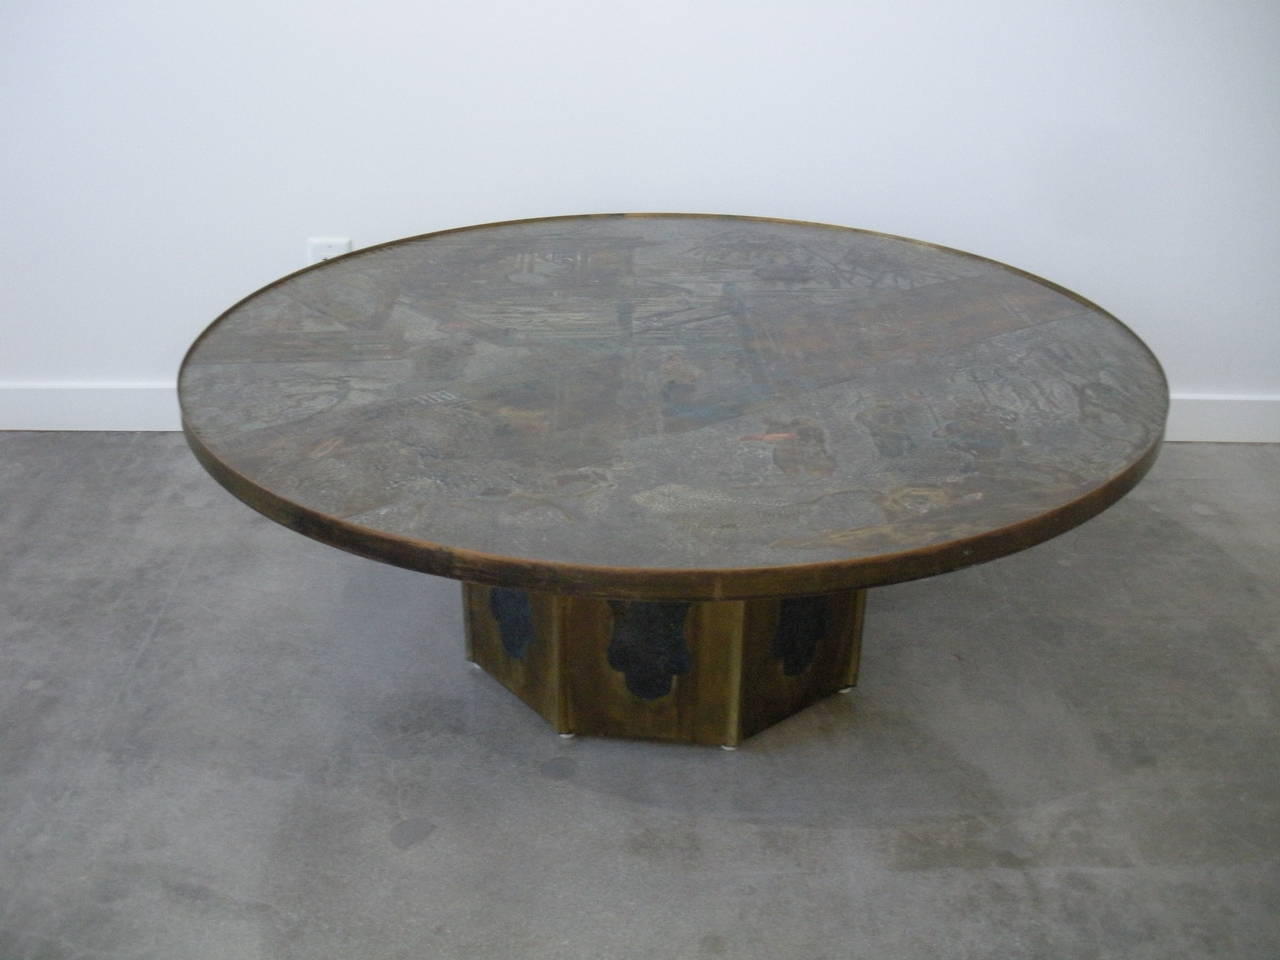 Beautiful LaVerne Chan bronze, pewter, and brass etched coffee table.
One owner original receipt.